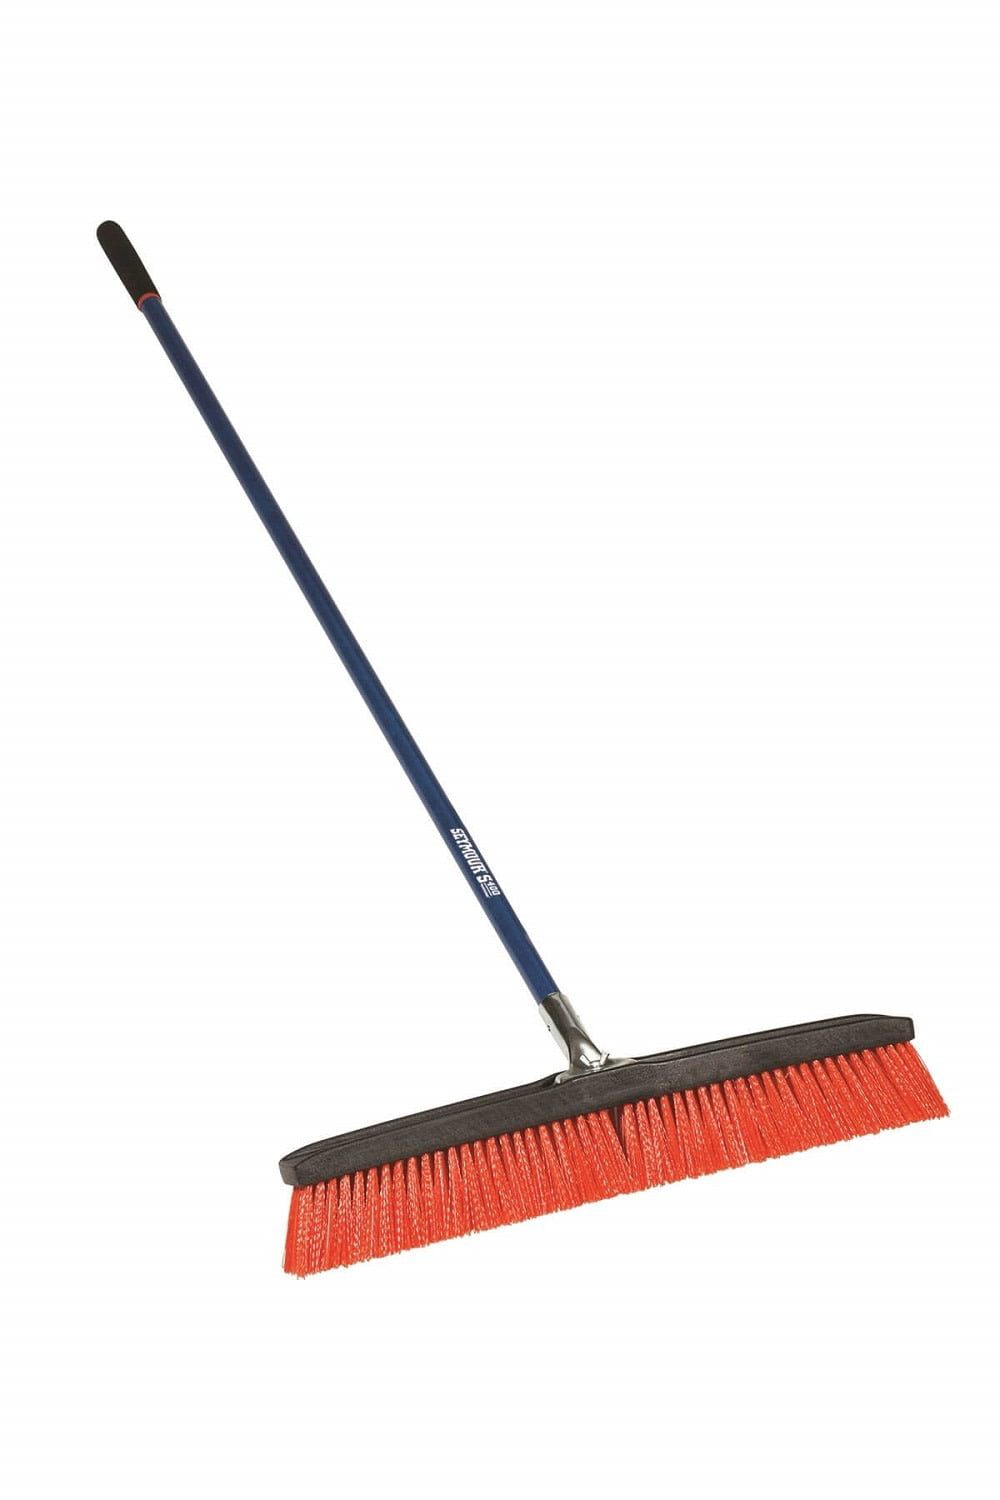 Telescoping Broom Handly from 24"-52" Camco Adjustable Broom and Dustpan 